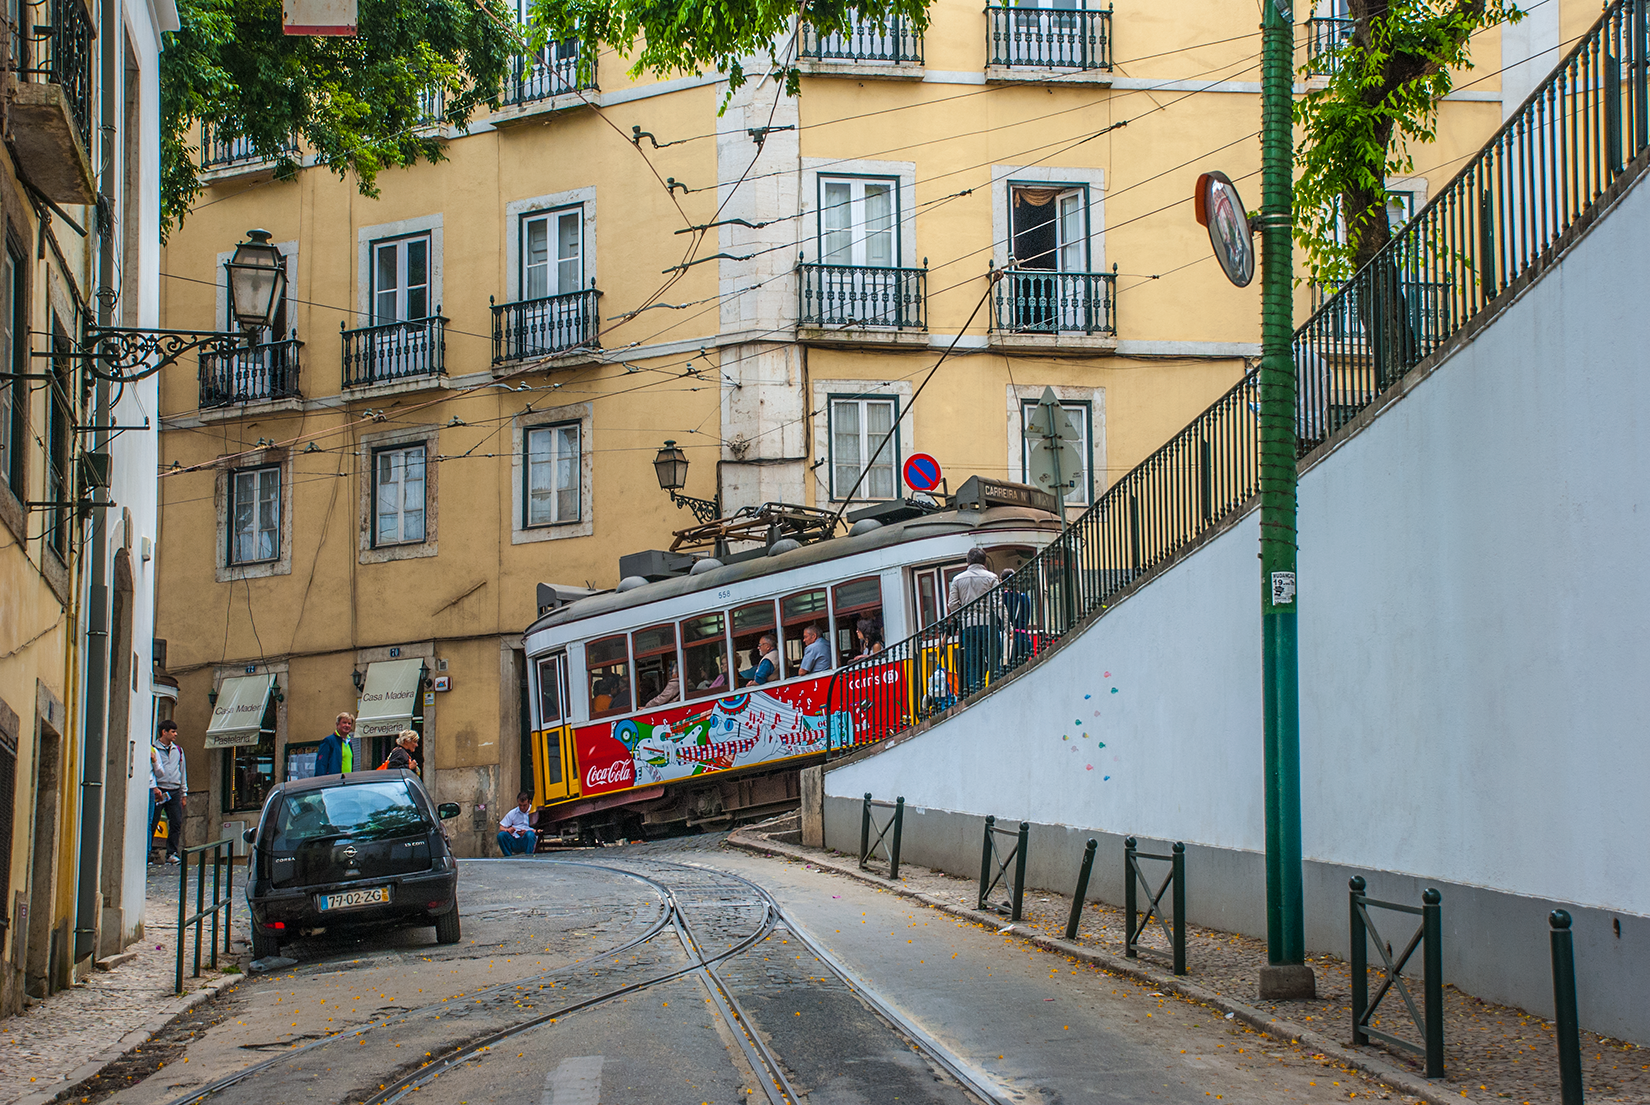 Car 558 at the junction of Beco Funil and Rua São Tomé heading to the city centre